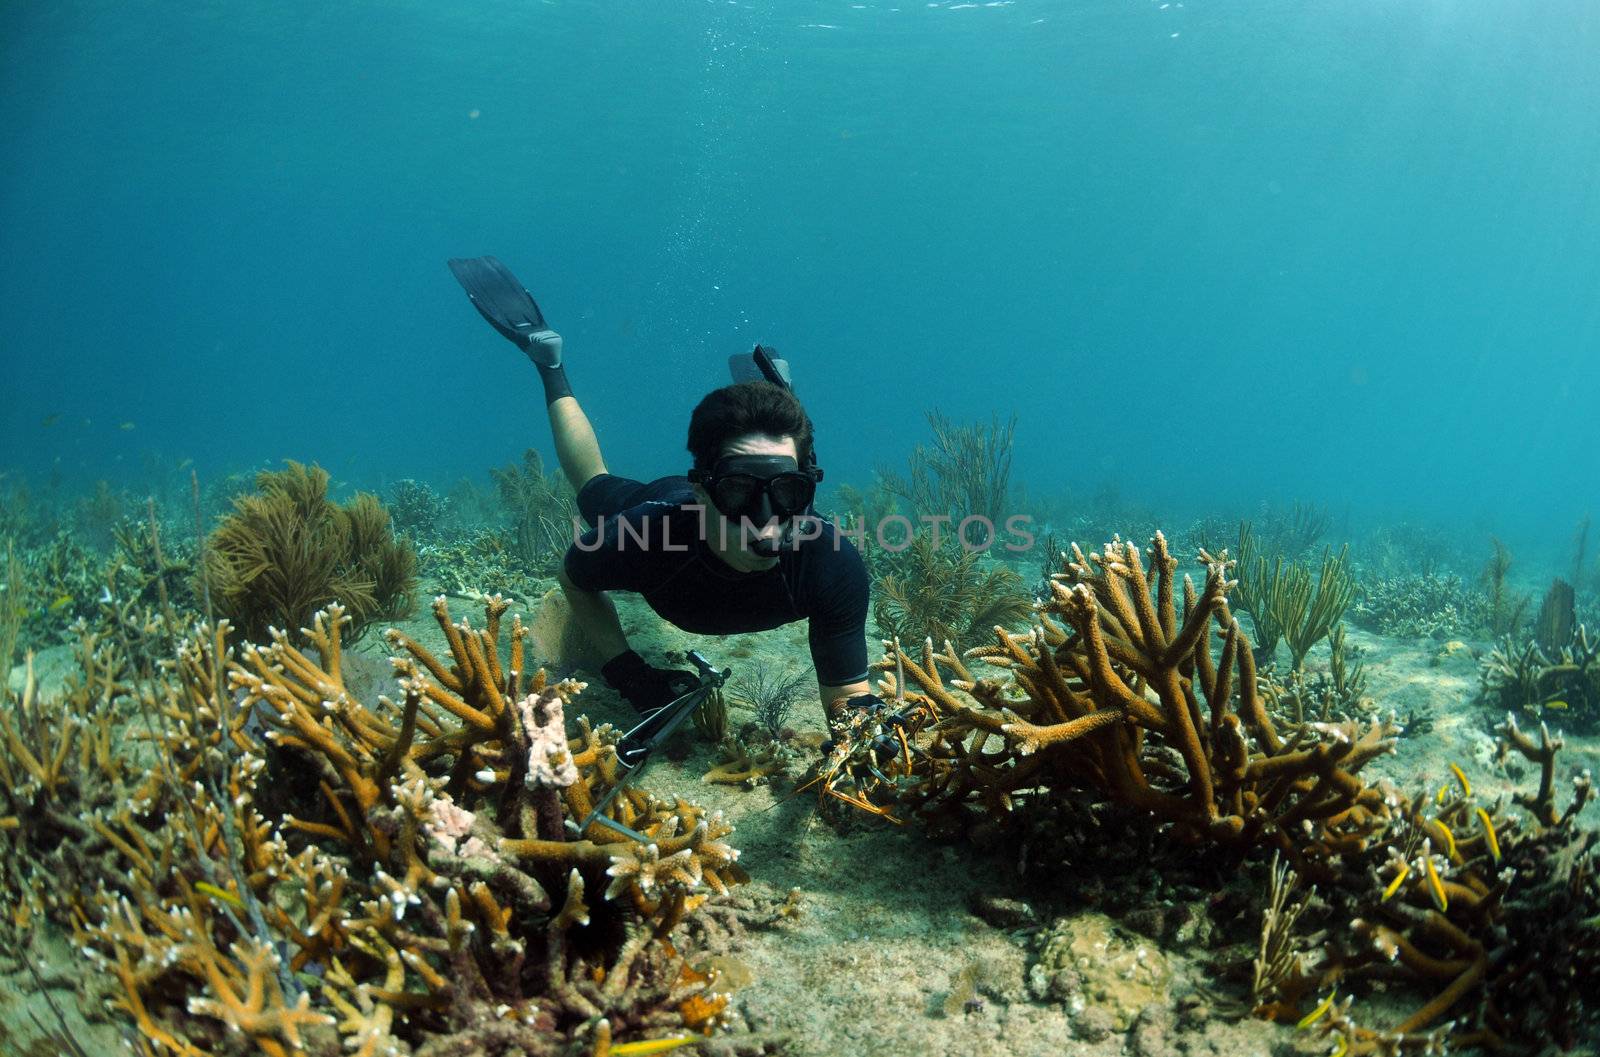 Man spearfishing in ocean with staghorn coral and gorgonians in background